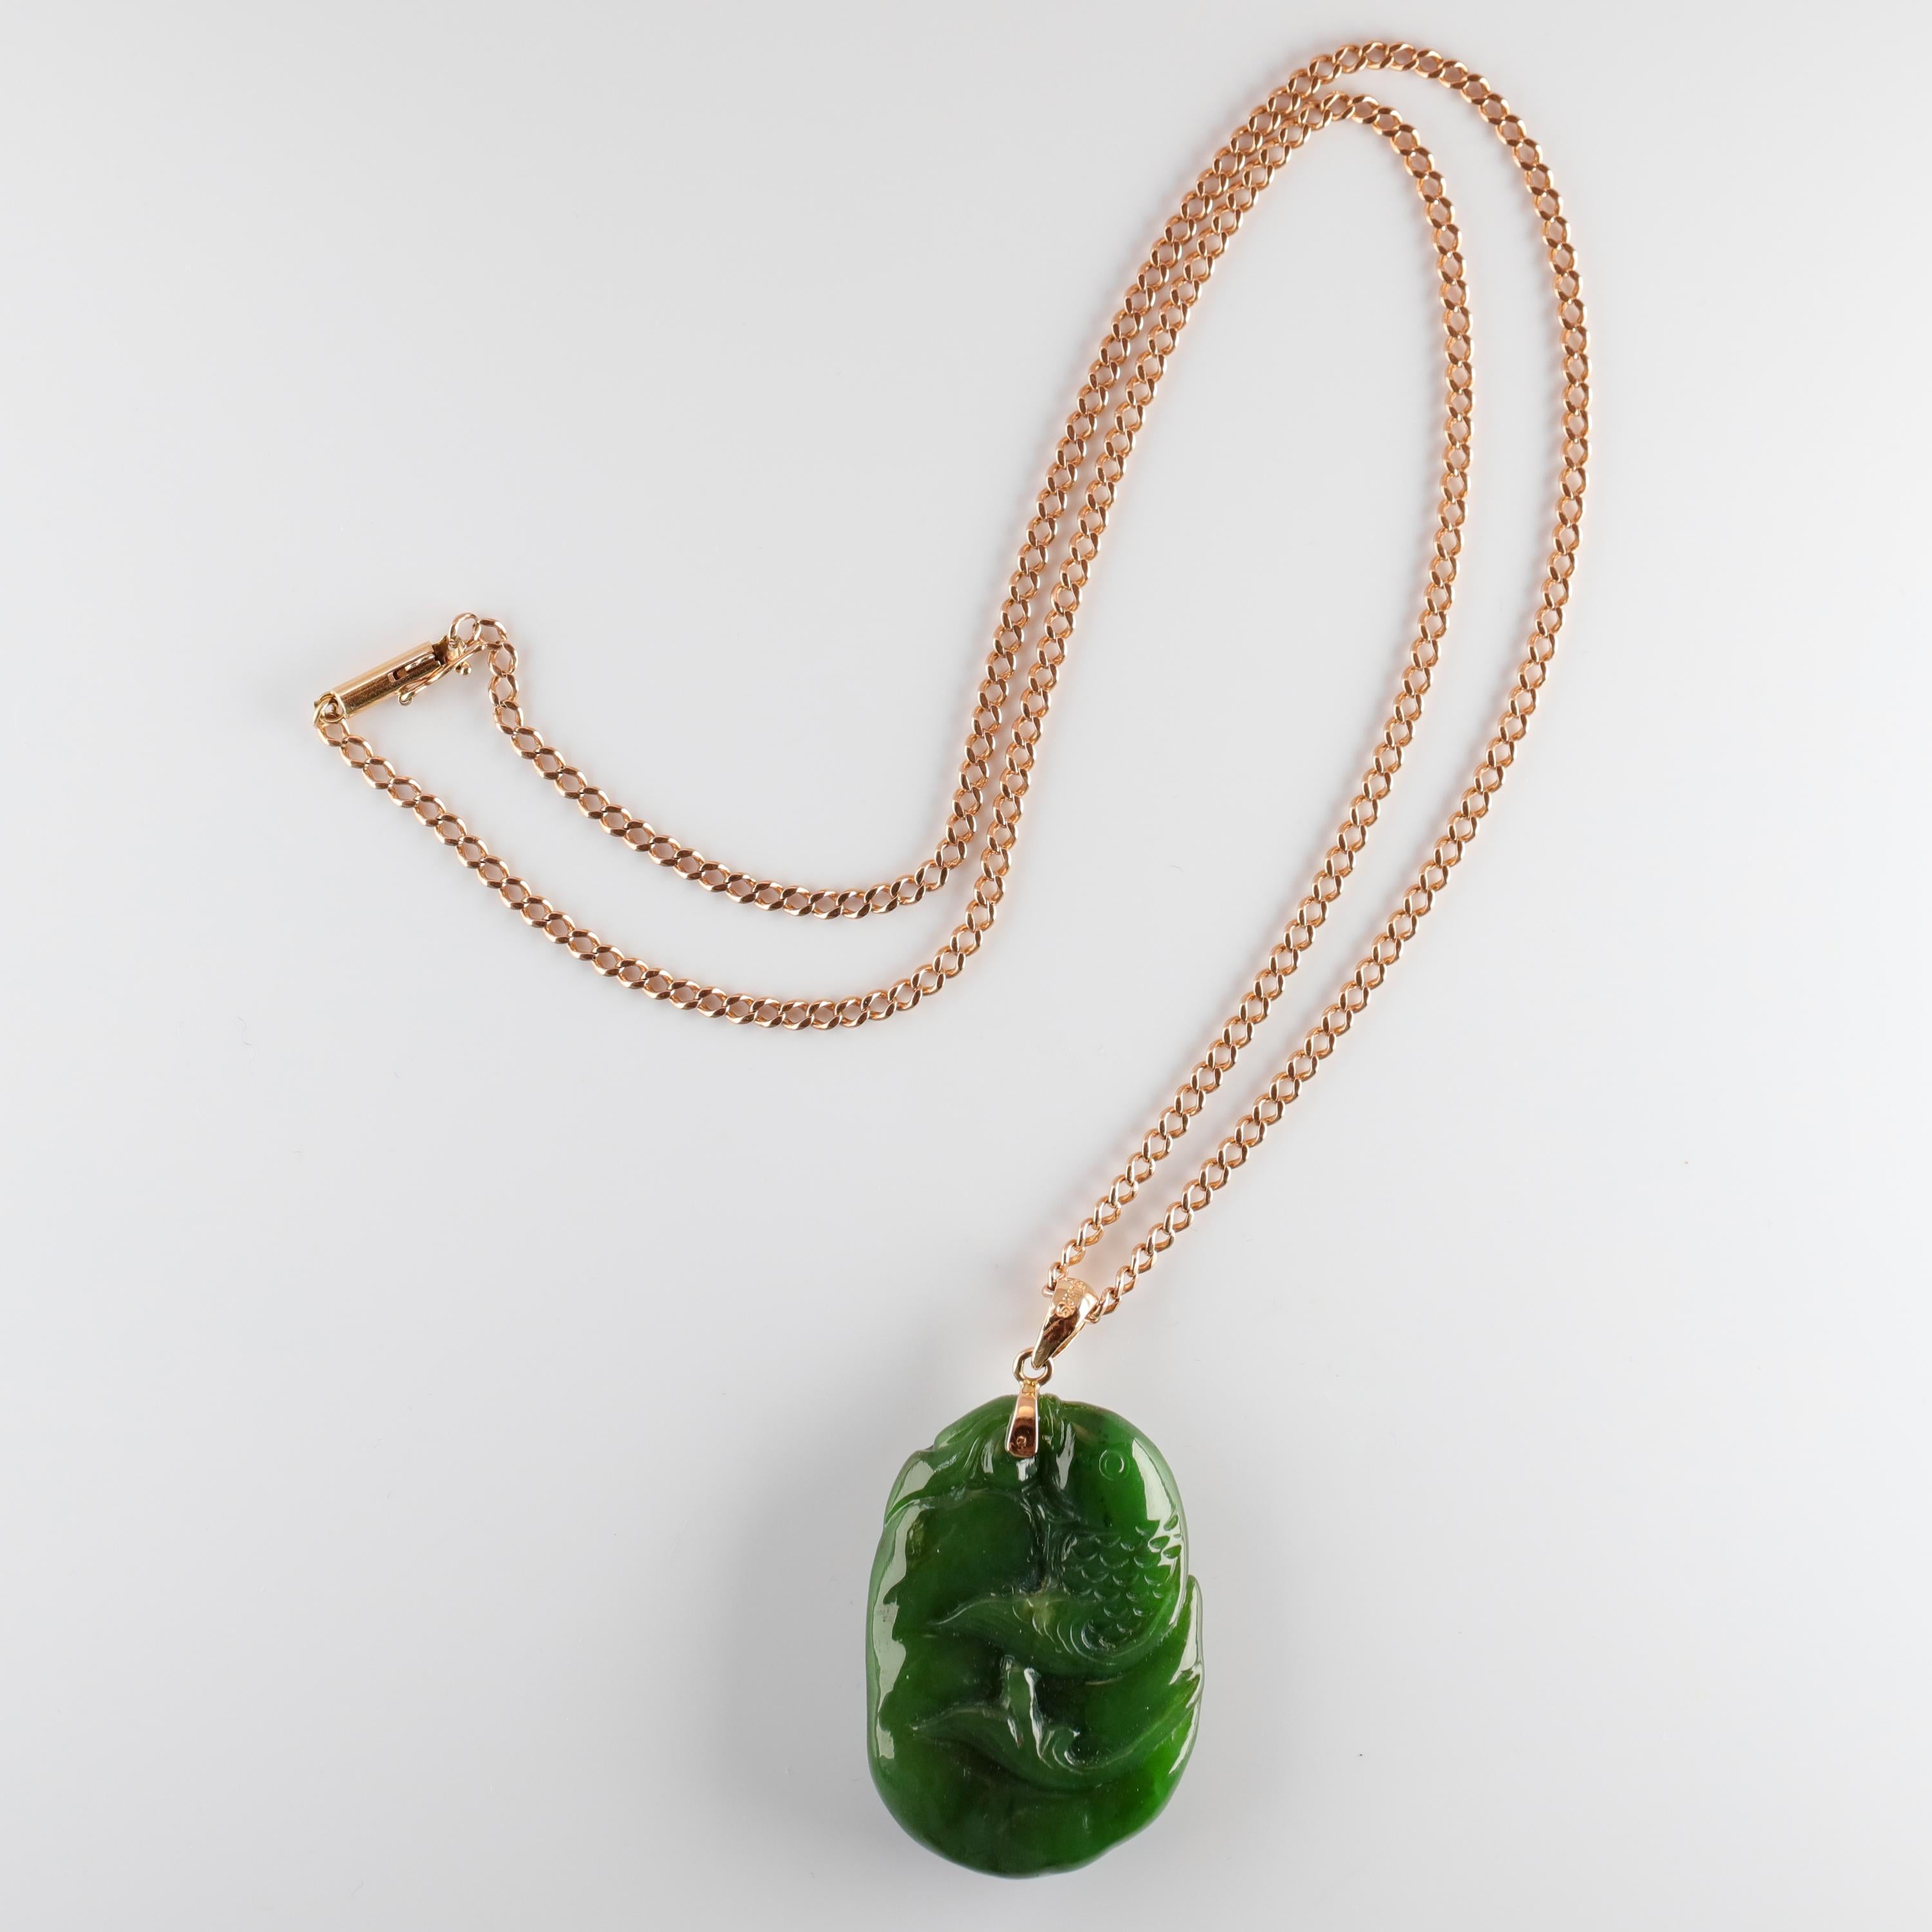 A spectacular and very rare rich green nephrite jade carved pendant from the iconic San Francisco retailer, Gump's. Jade jewelry from Gump's of San Francisco is among the most valued and collectible jade jewelry on the market. It's rare to find